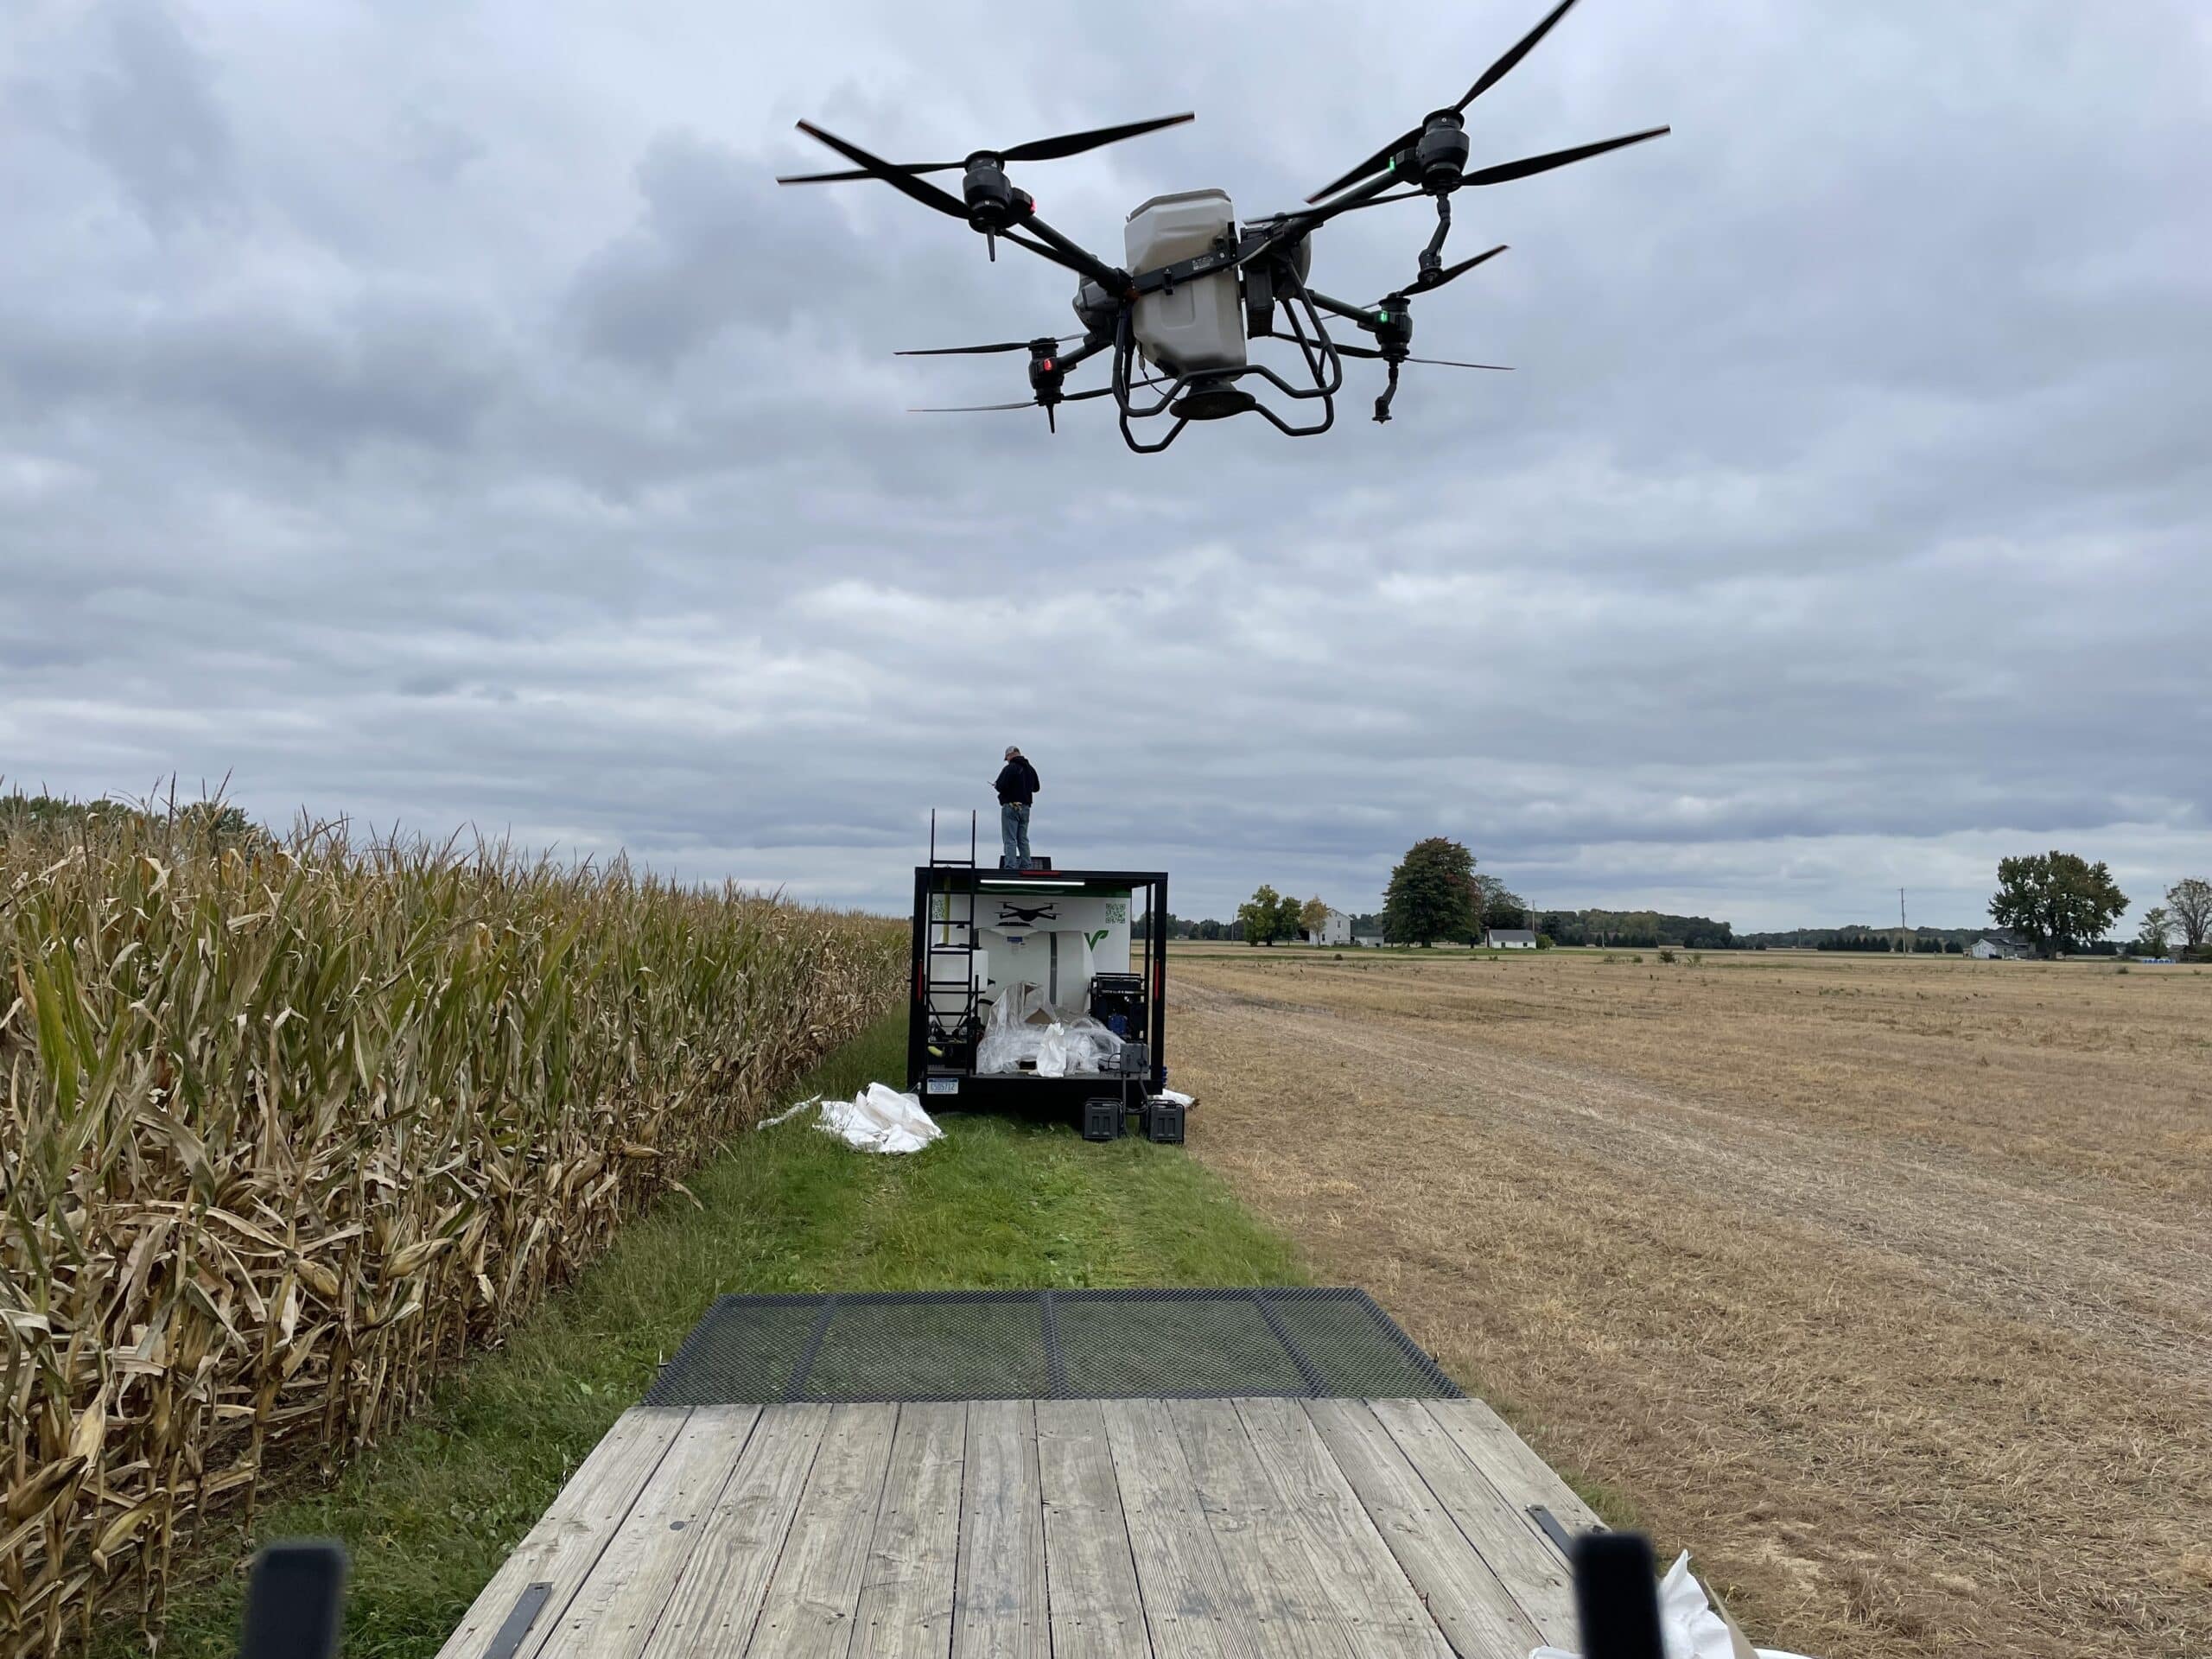 A commercial drone flies near an operator on a trailer by a cornfield, symbolizing modern technology in traditional farming.